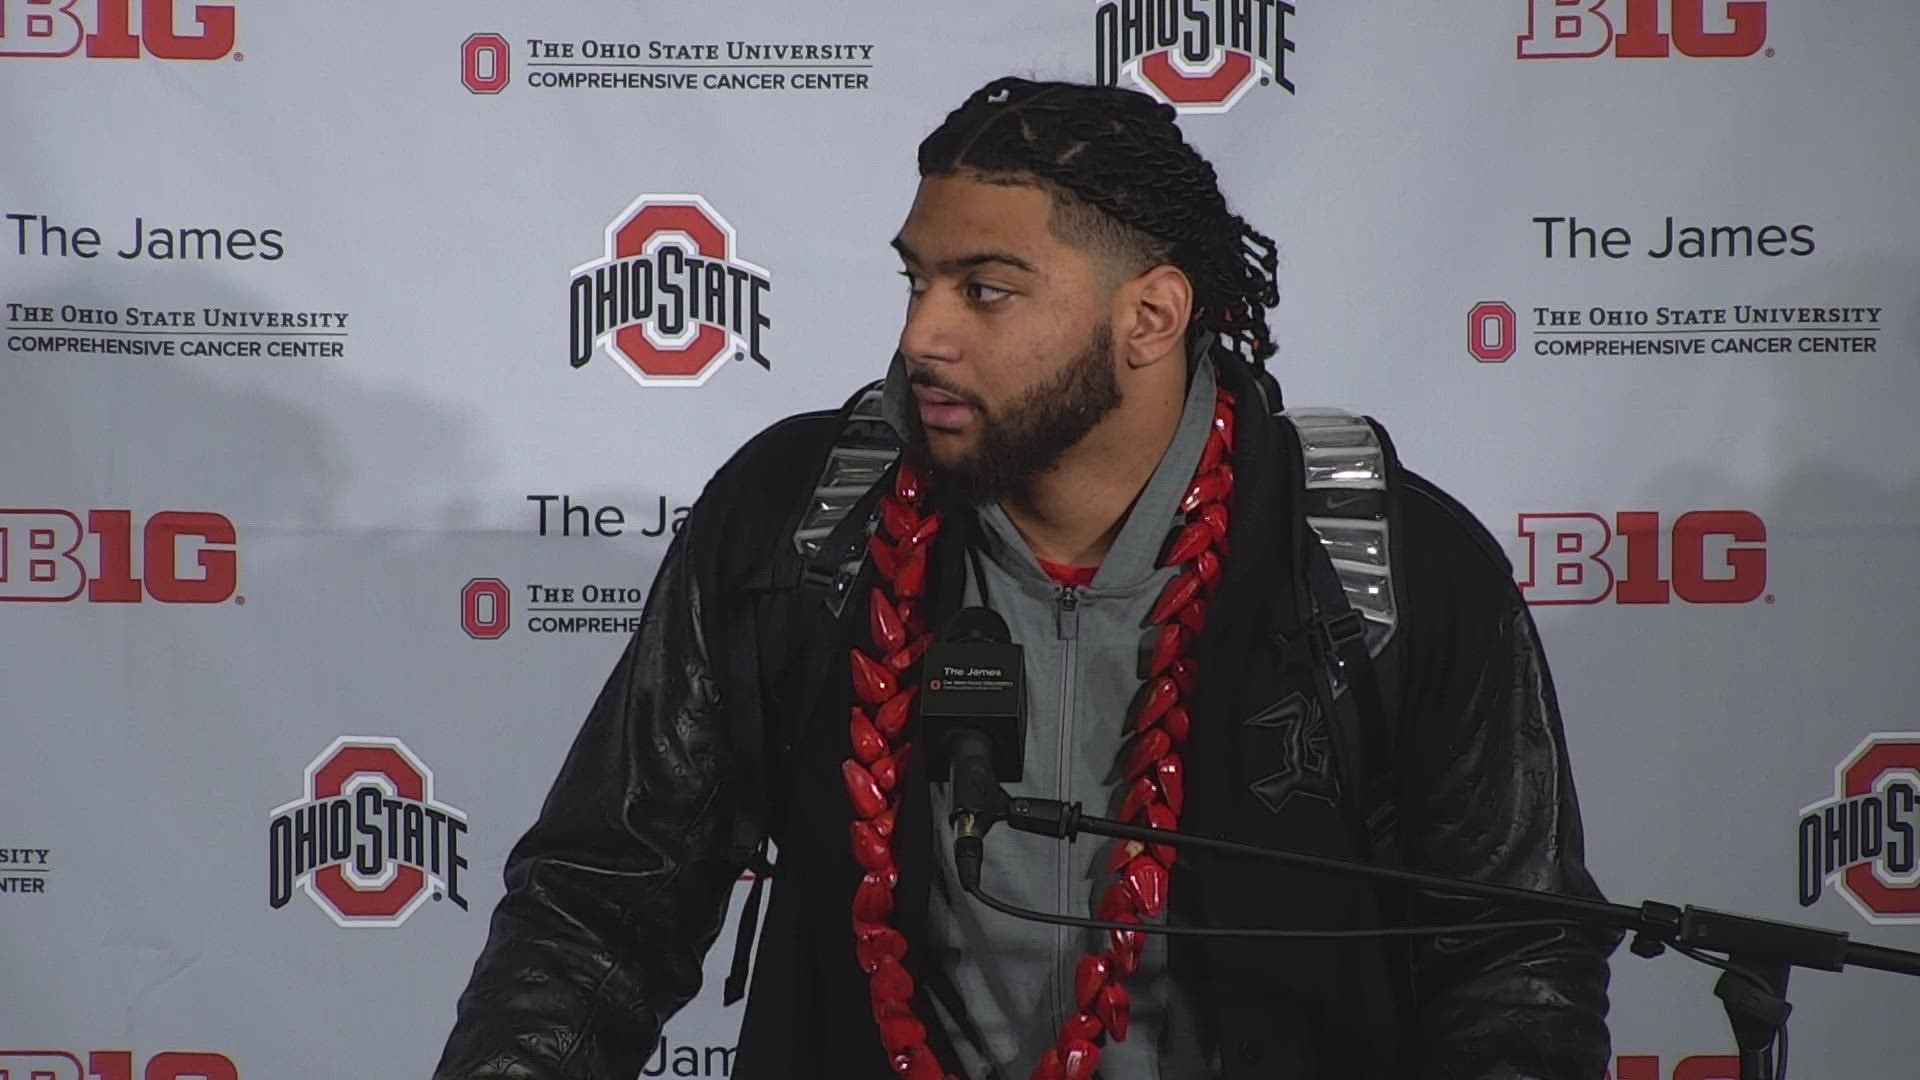 Tuimoloau had four tackles including two tackles-for-loss in the Buckeyes' loss to Michigan.